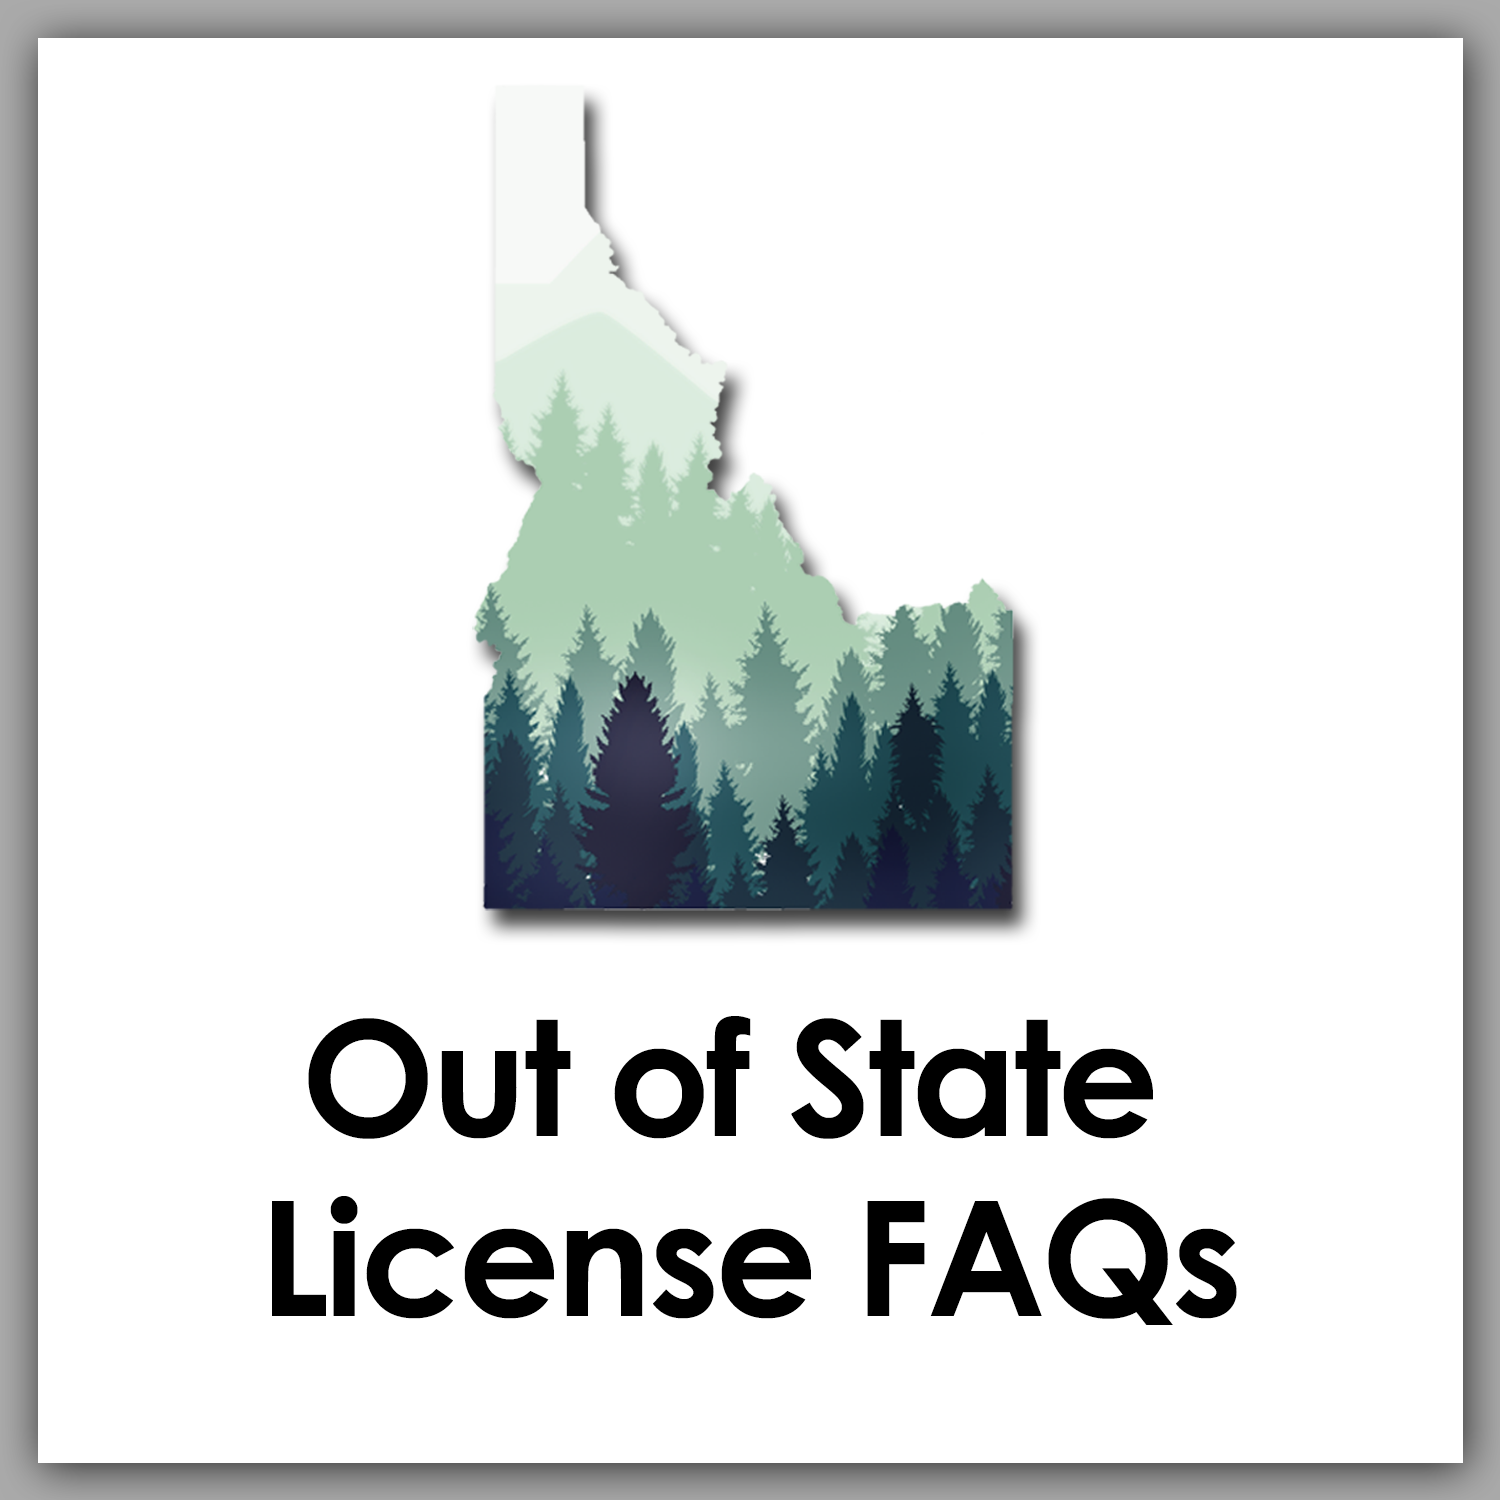 Out of State License FAQs